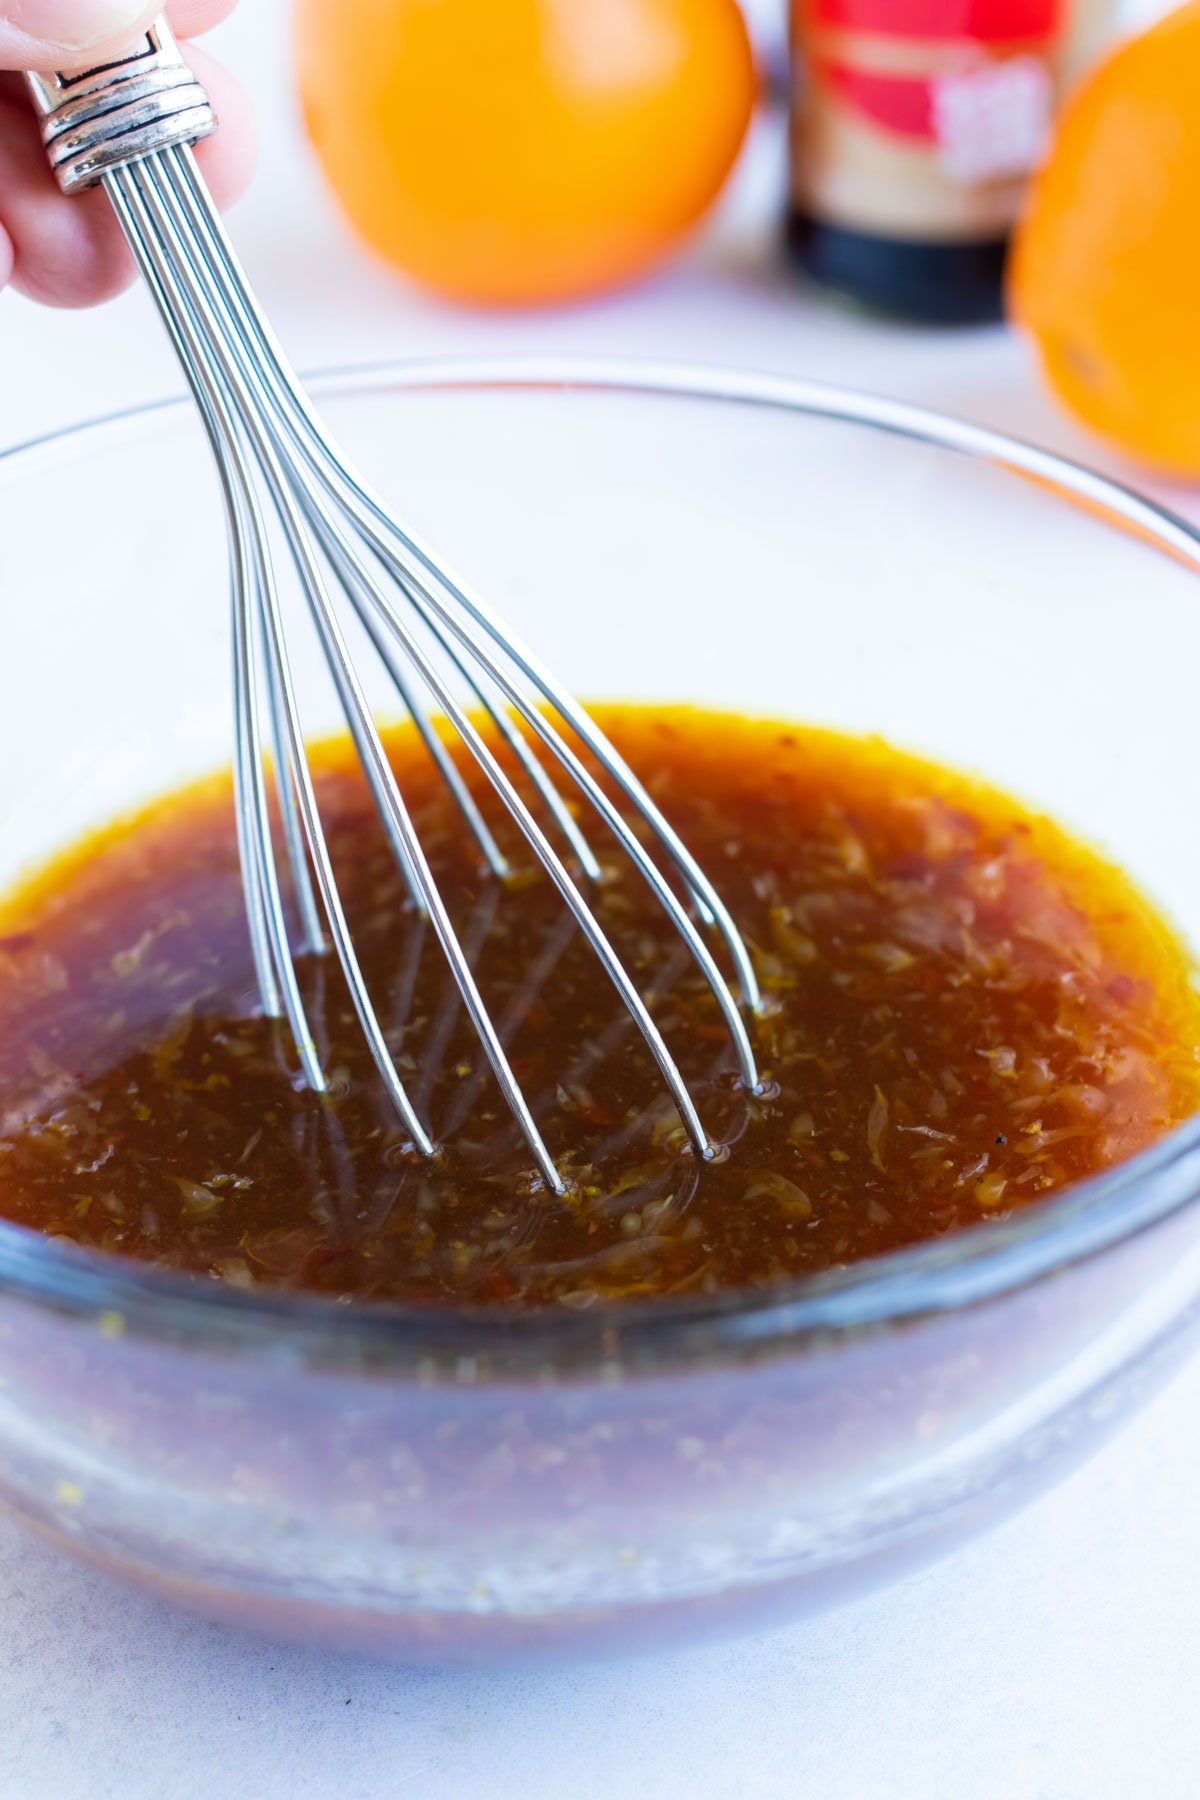 A healthy orange sauce being whisked together in a clear bowl.